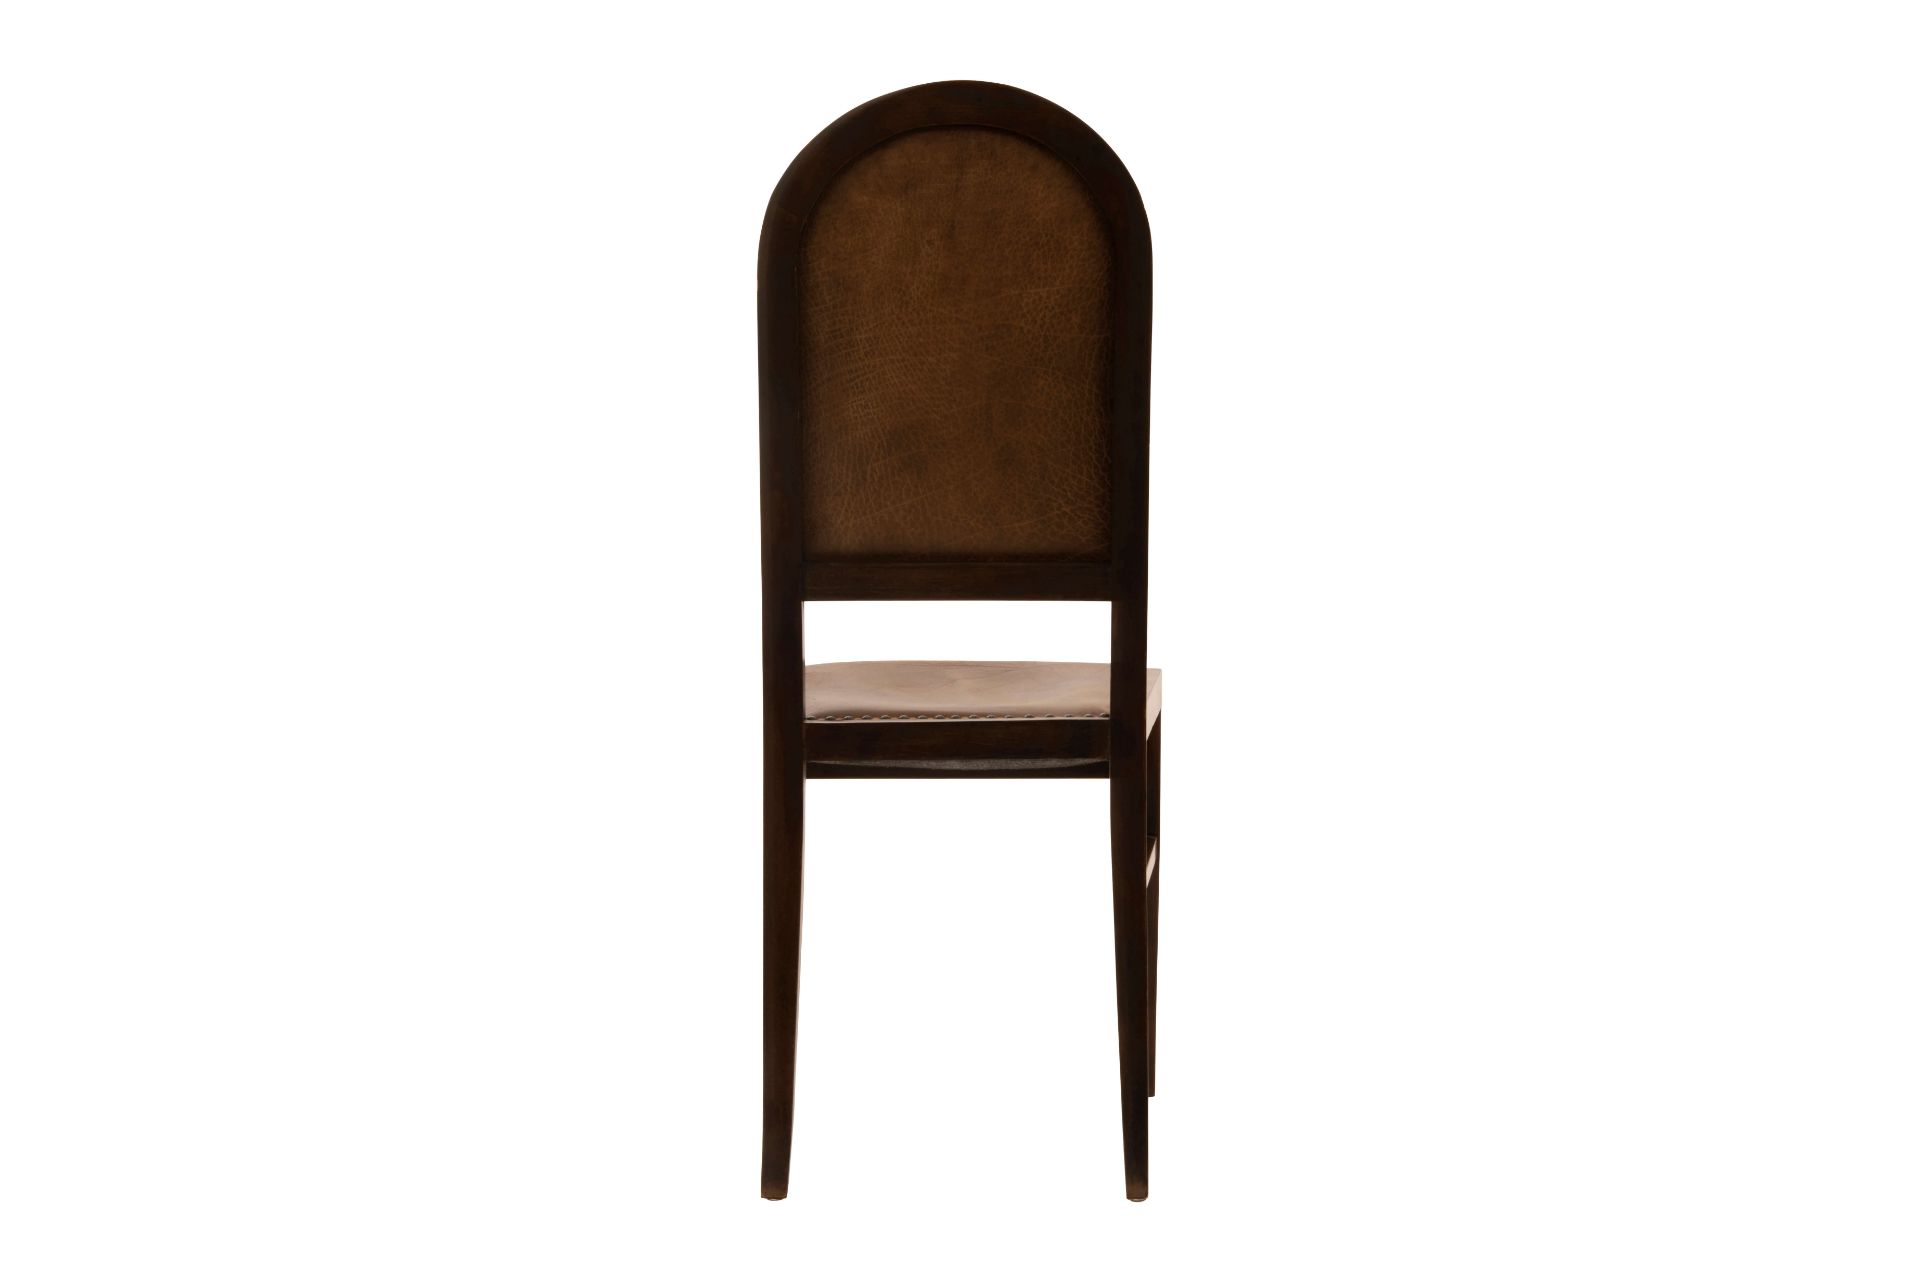 6 Esszimmer Stühle |Six Dinning Chairs - Image 3 of 5